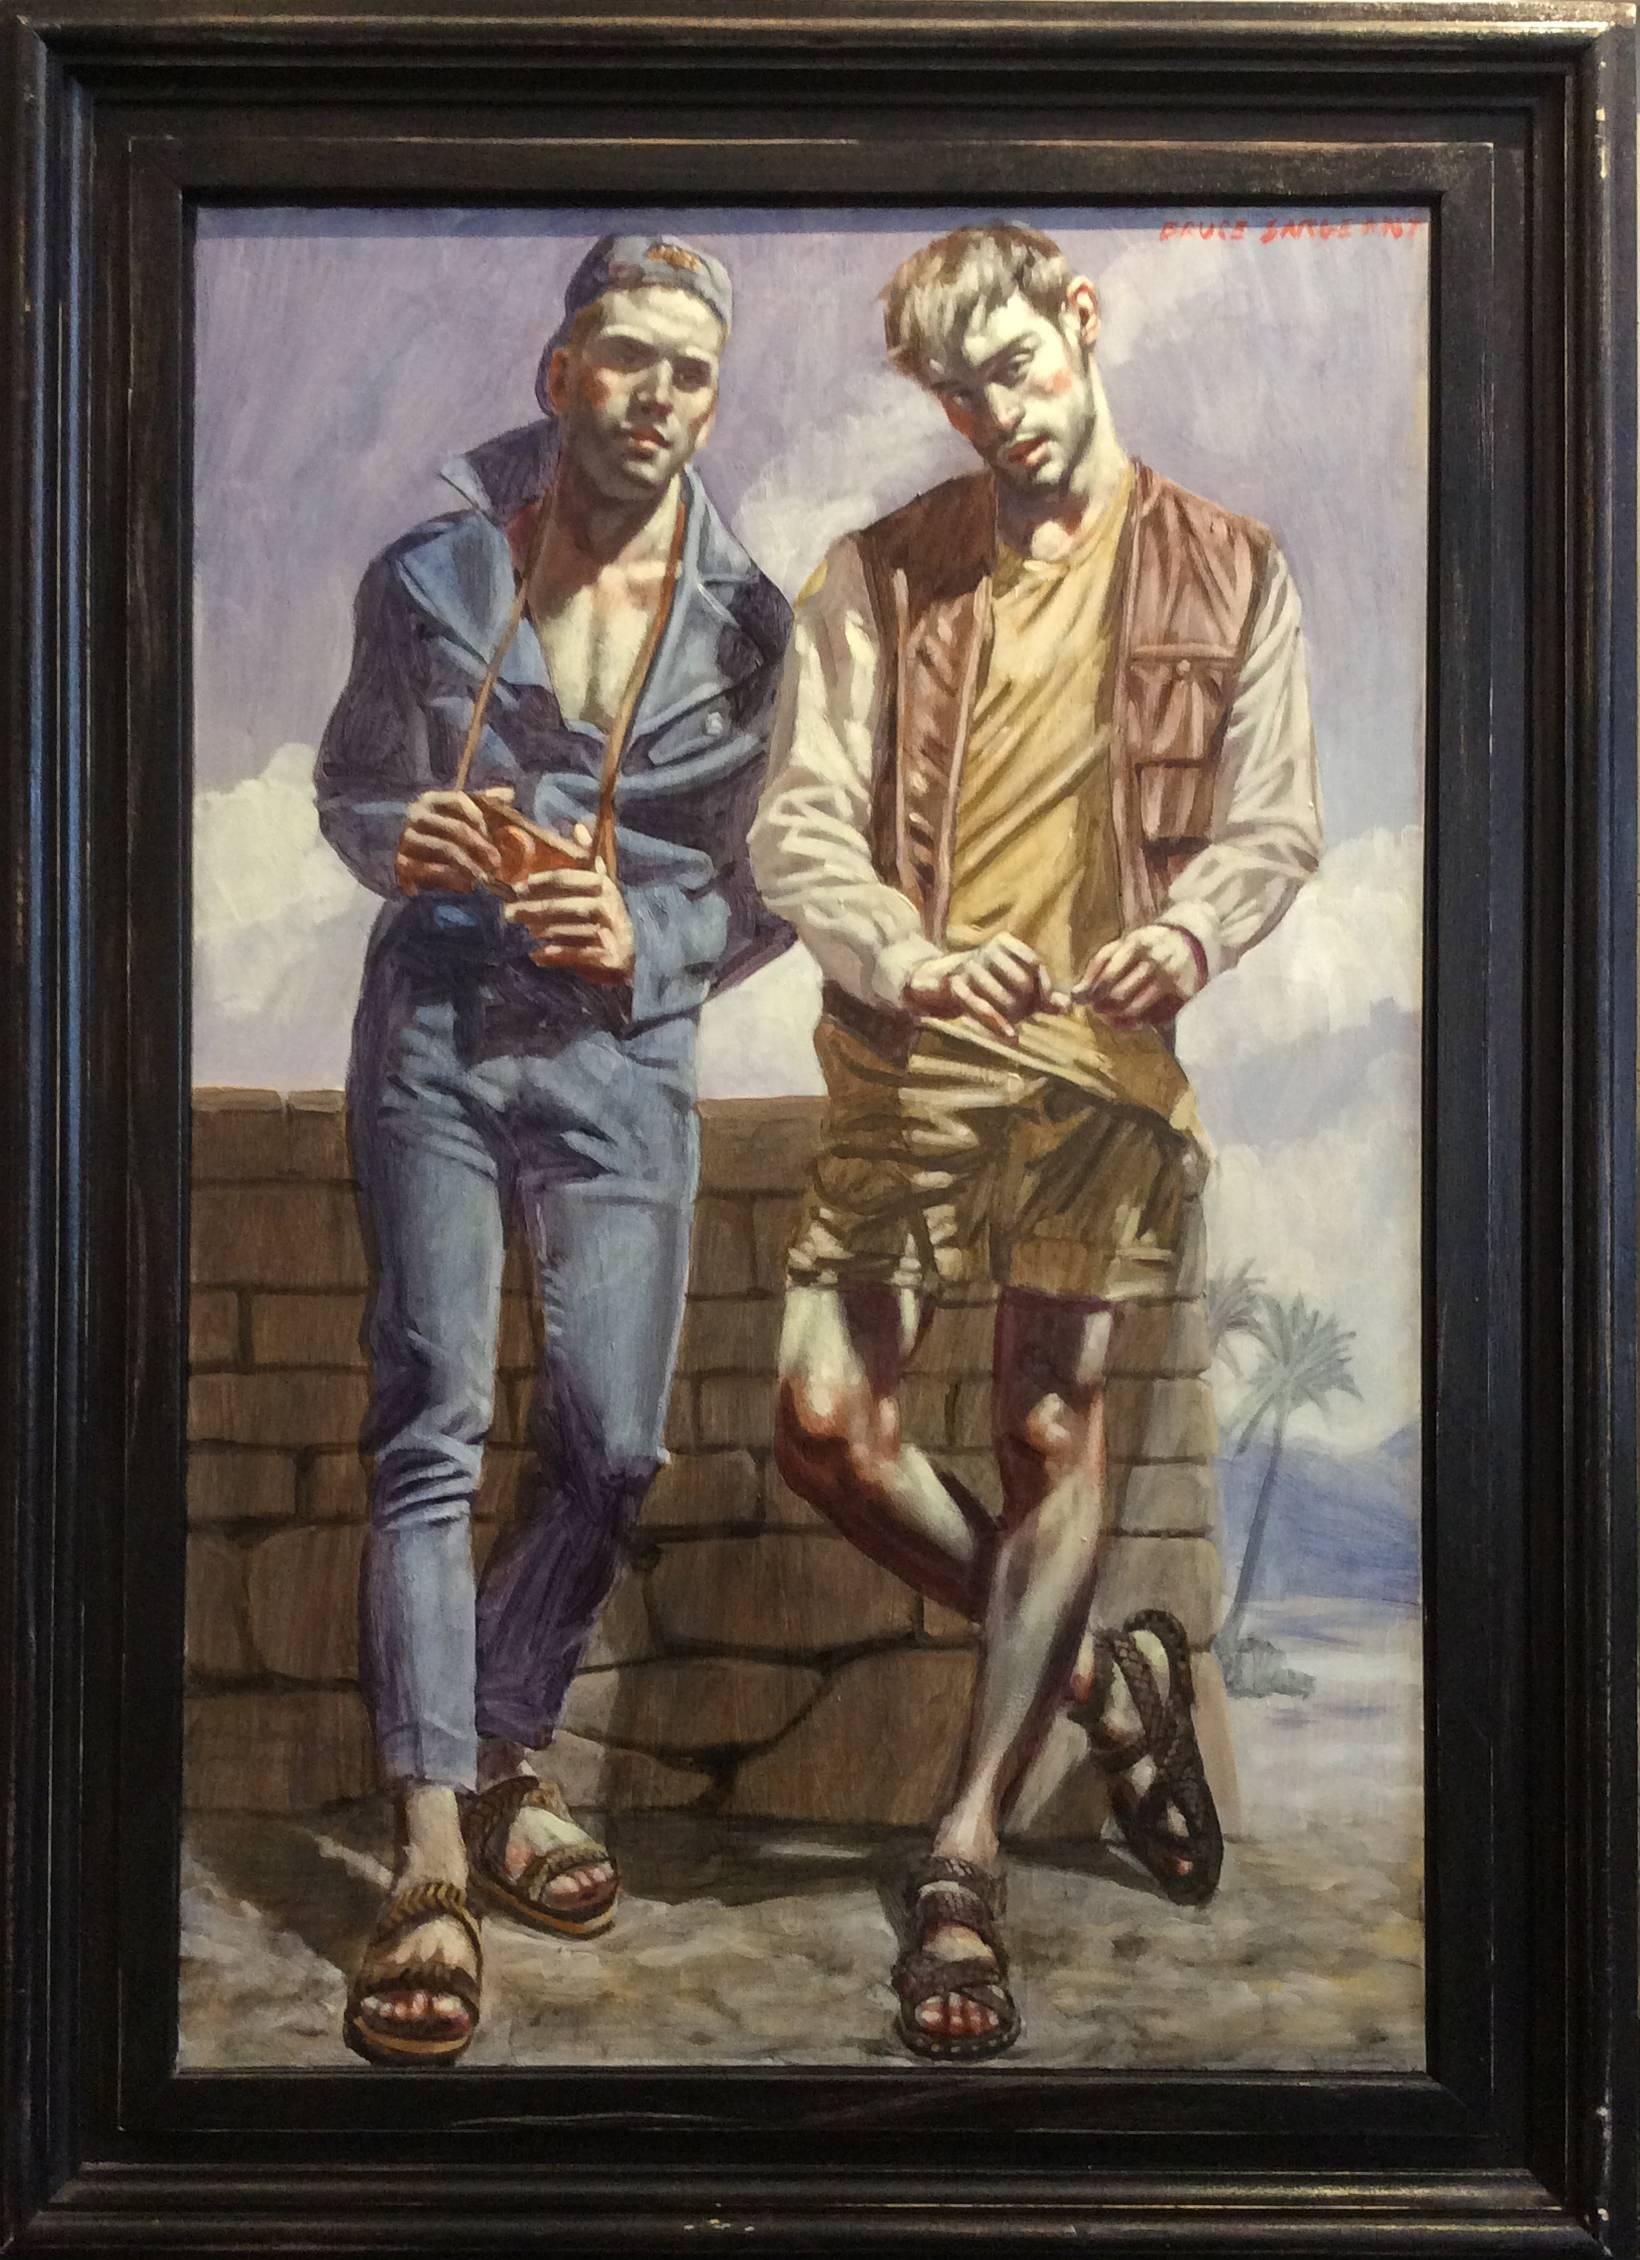 Mark Beard Figurative Painting - Two Young Men in Sandals (Framed Vertical Figurative Oil Painting on Canvas)